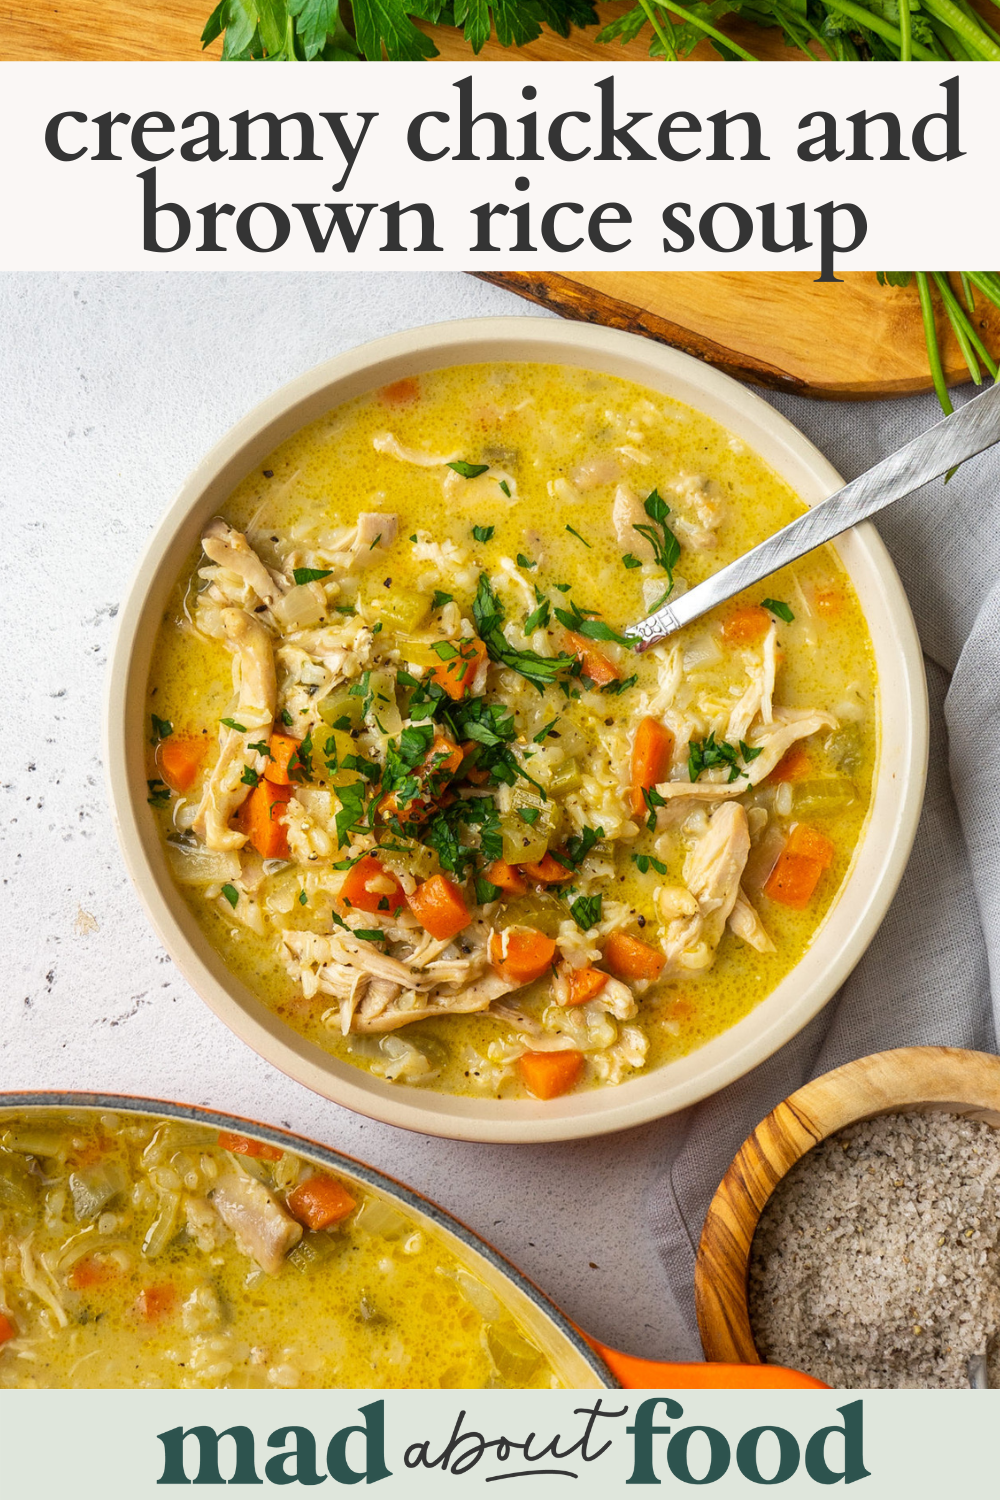 Image for pinning creamy chicken and brown rice soup on Pinterest